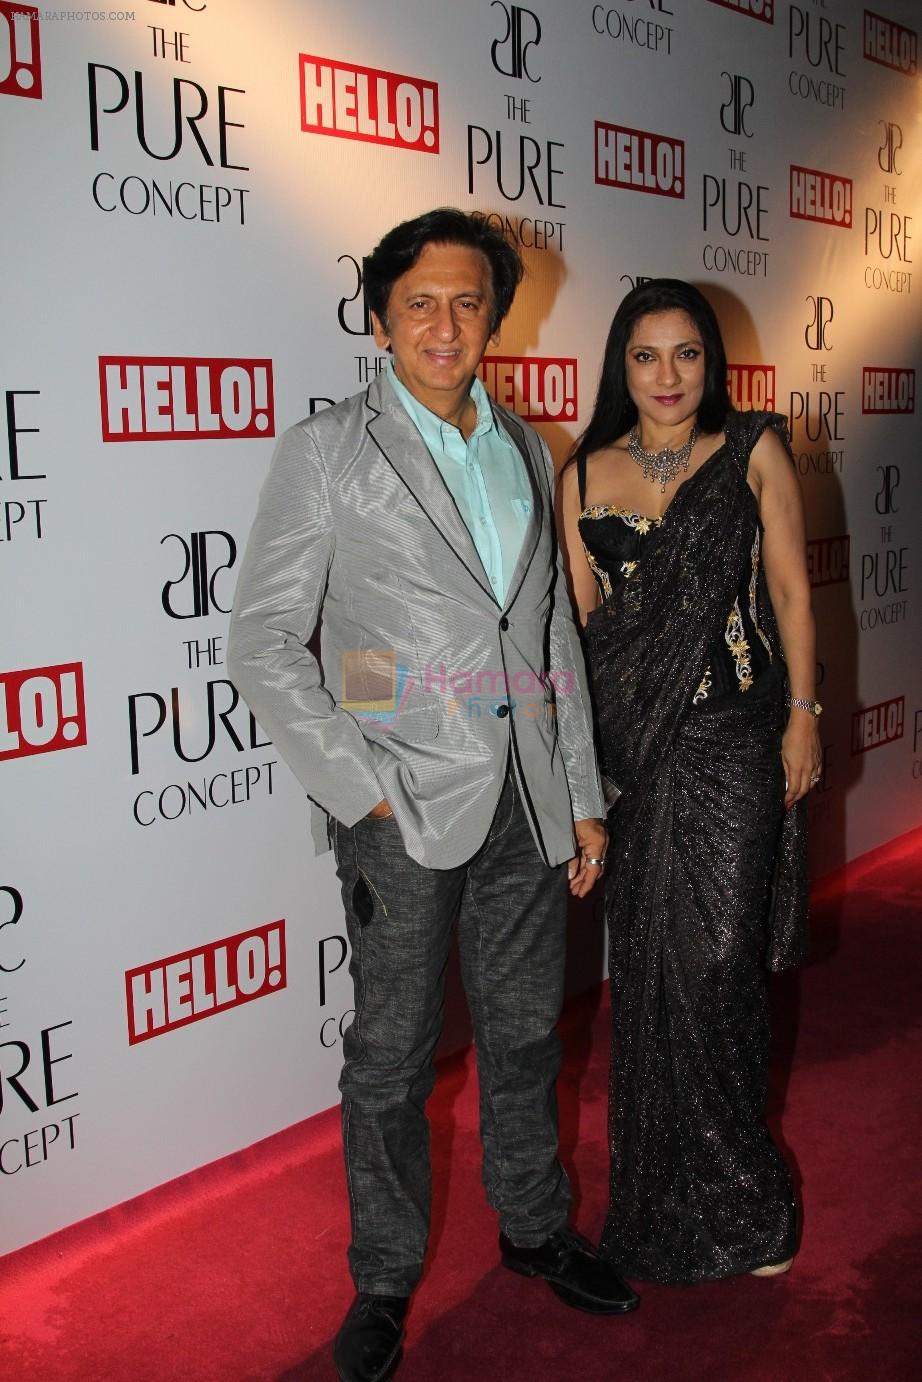 Kailash and Aarti Surendranath at the launch of Pure Concept in Mumbai on 29th June 2012